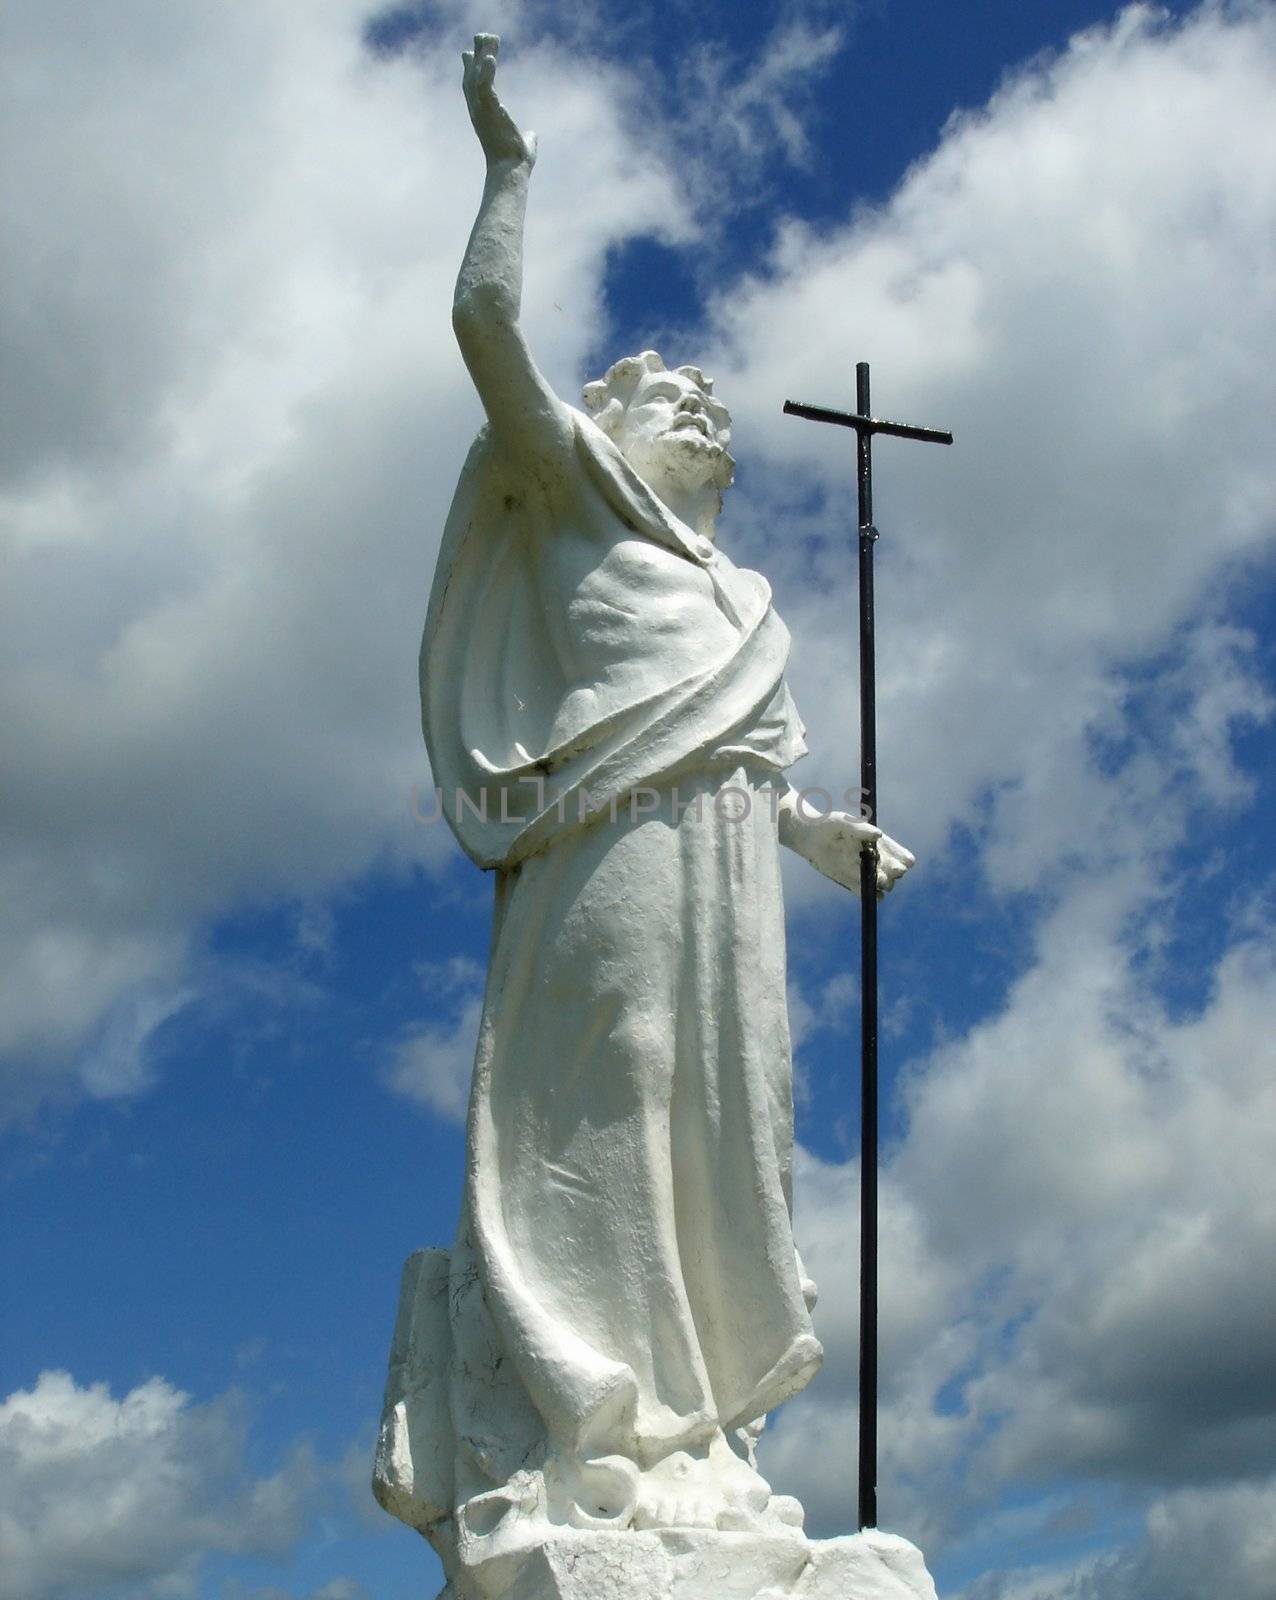 White statue of Jesus-Christ with a cross in one hand and with the other hand up while praying God